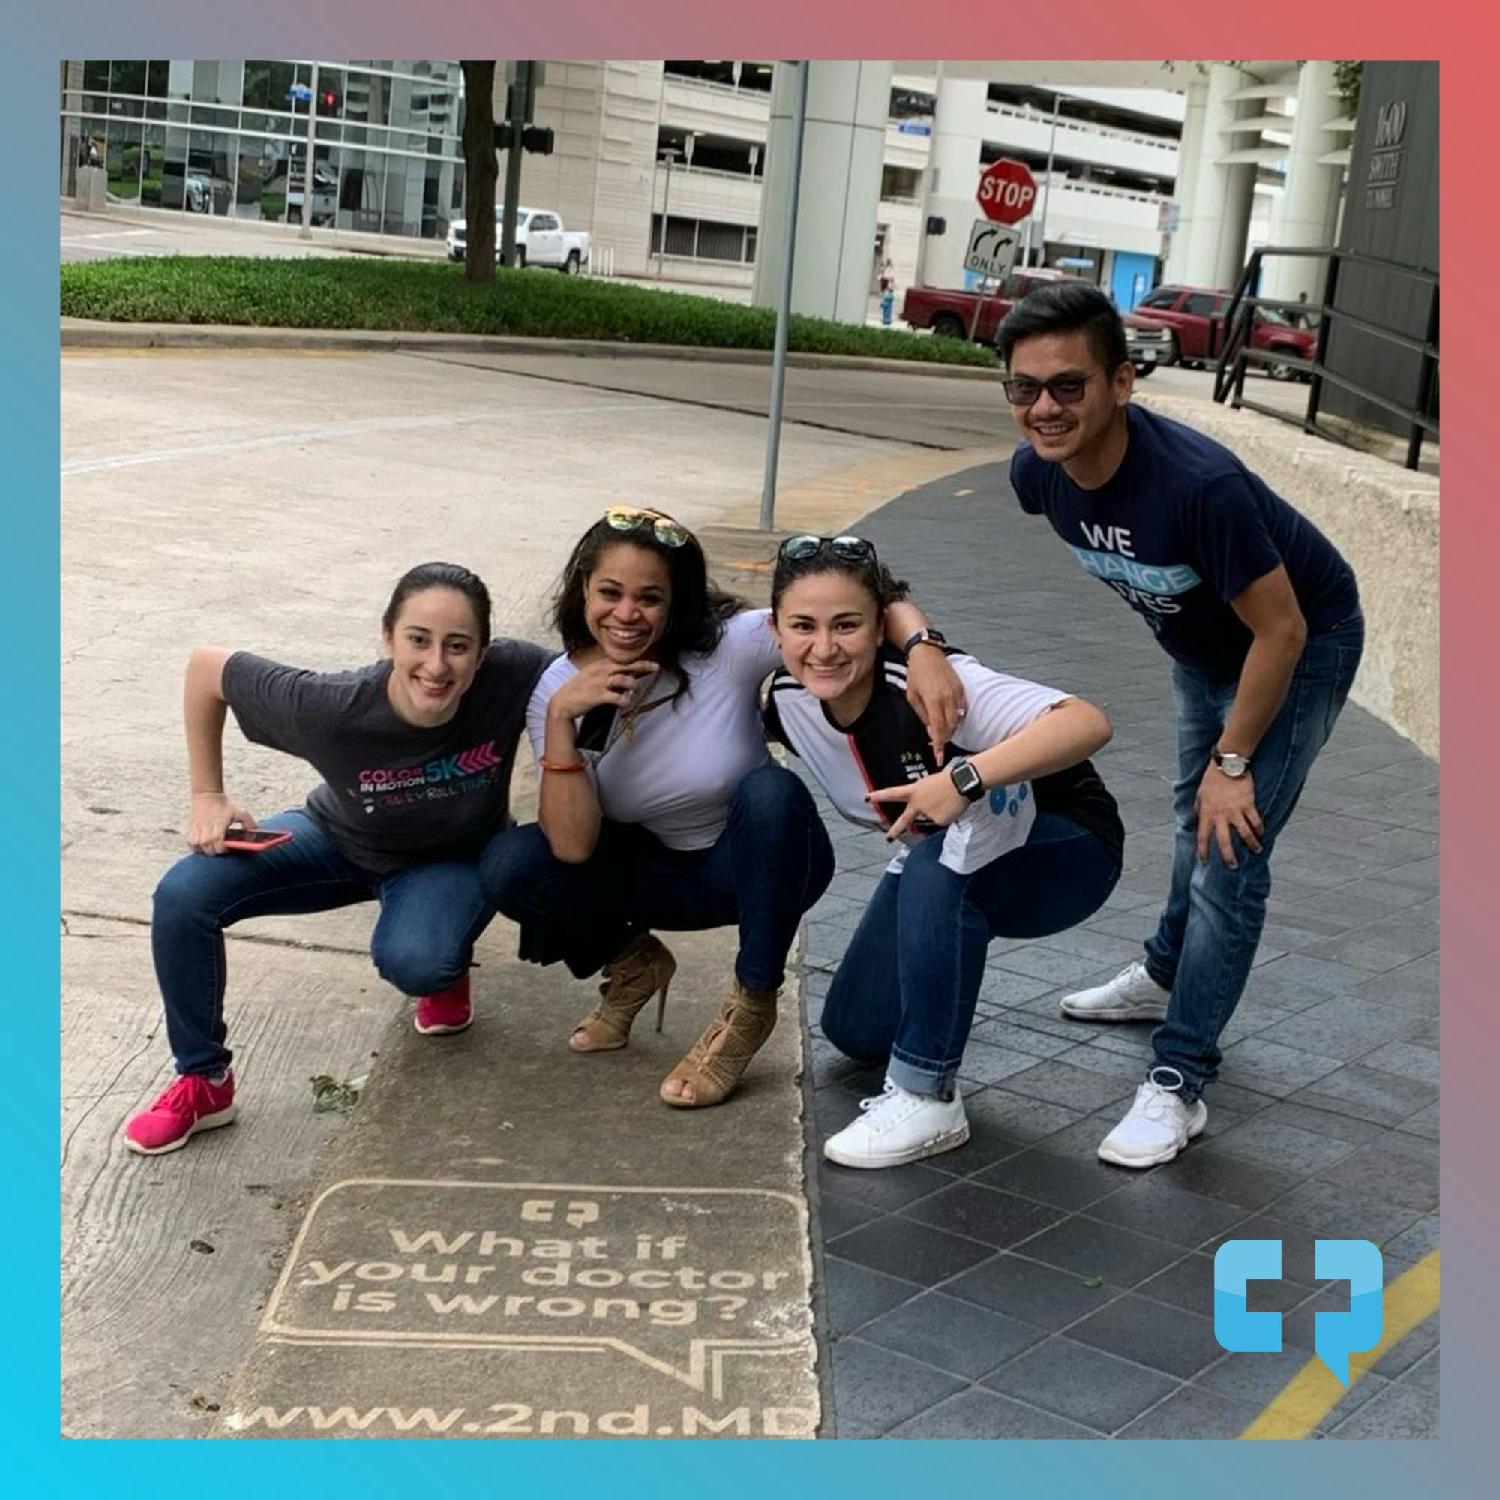 We conducted a clean graffiti scavenger hunt around Houston with location clues for employees to find.